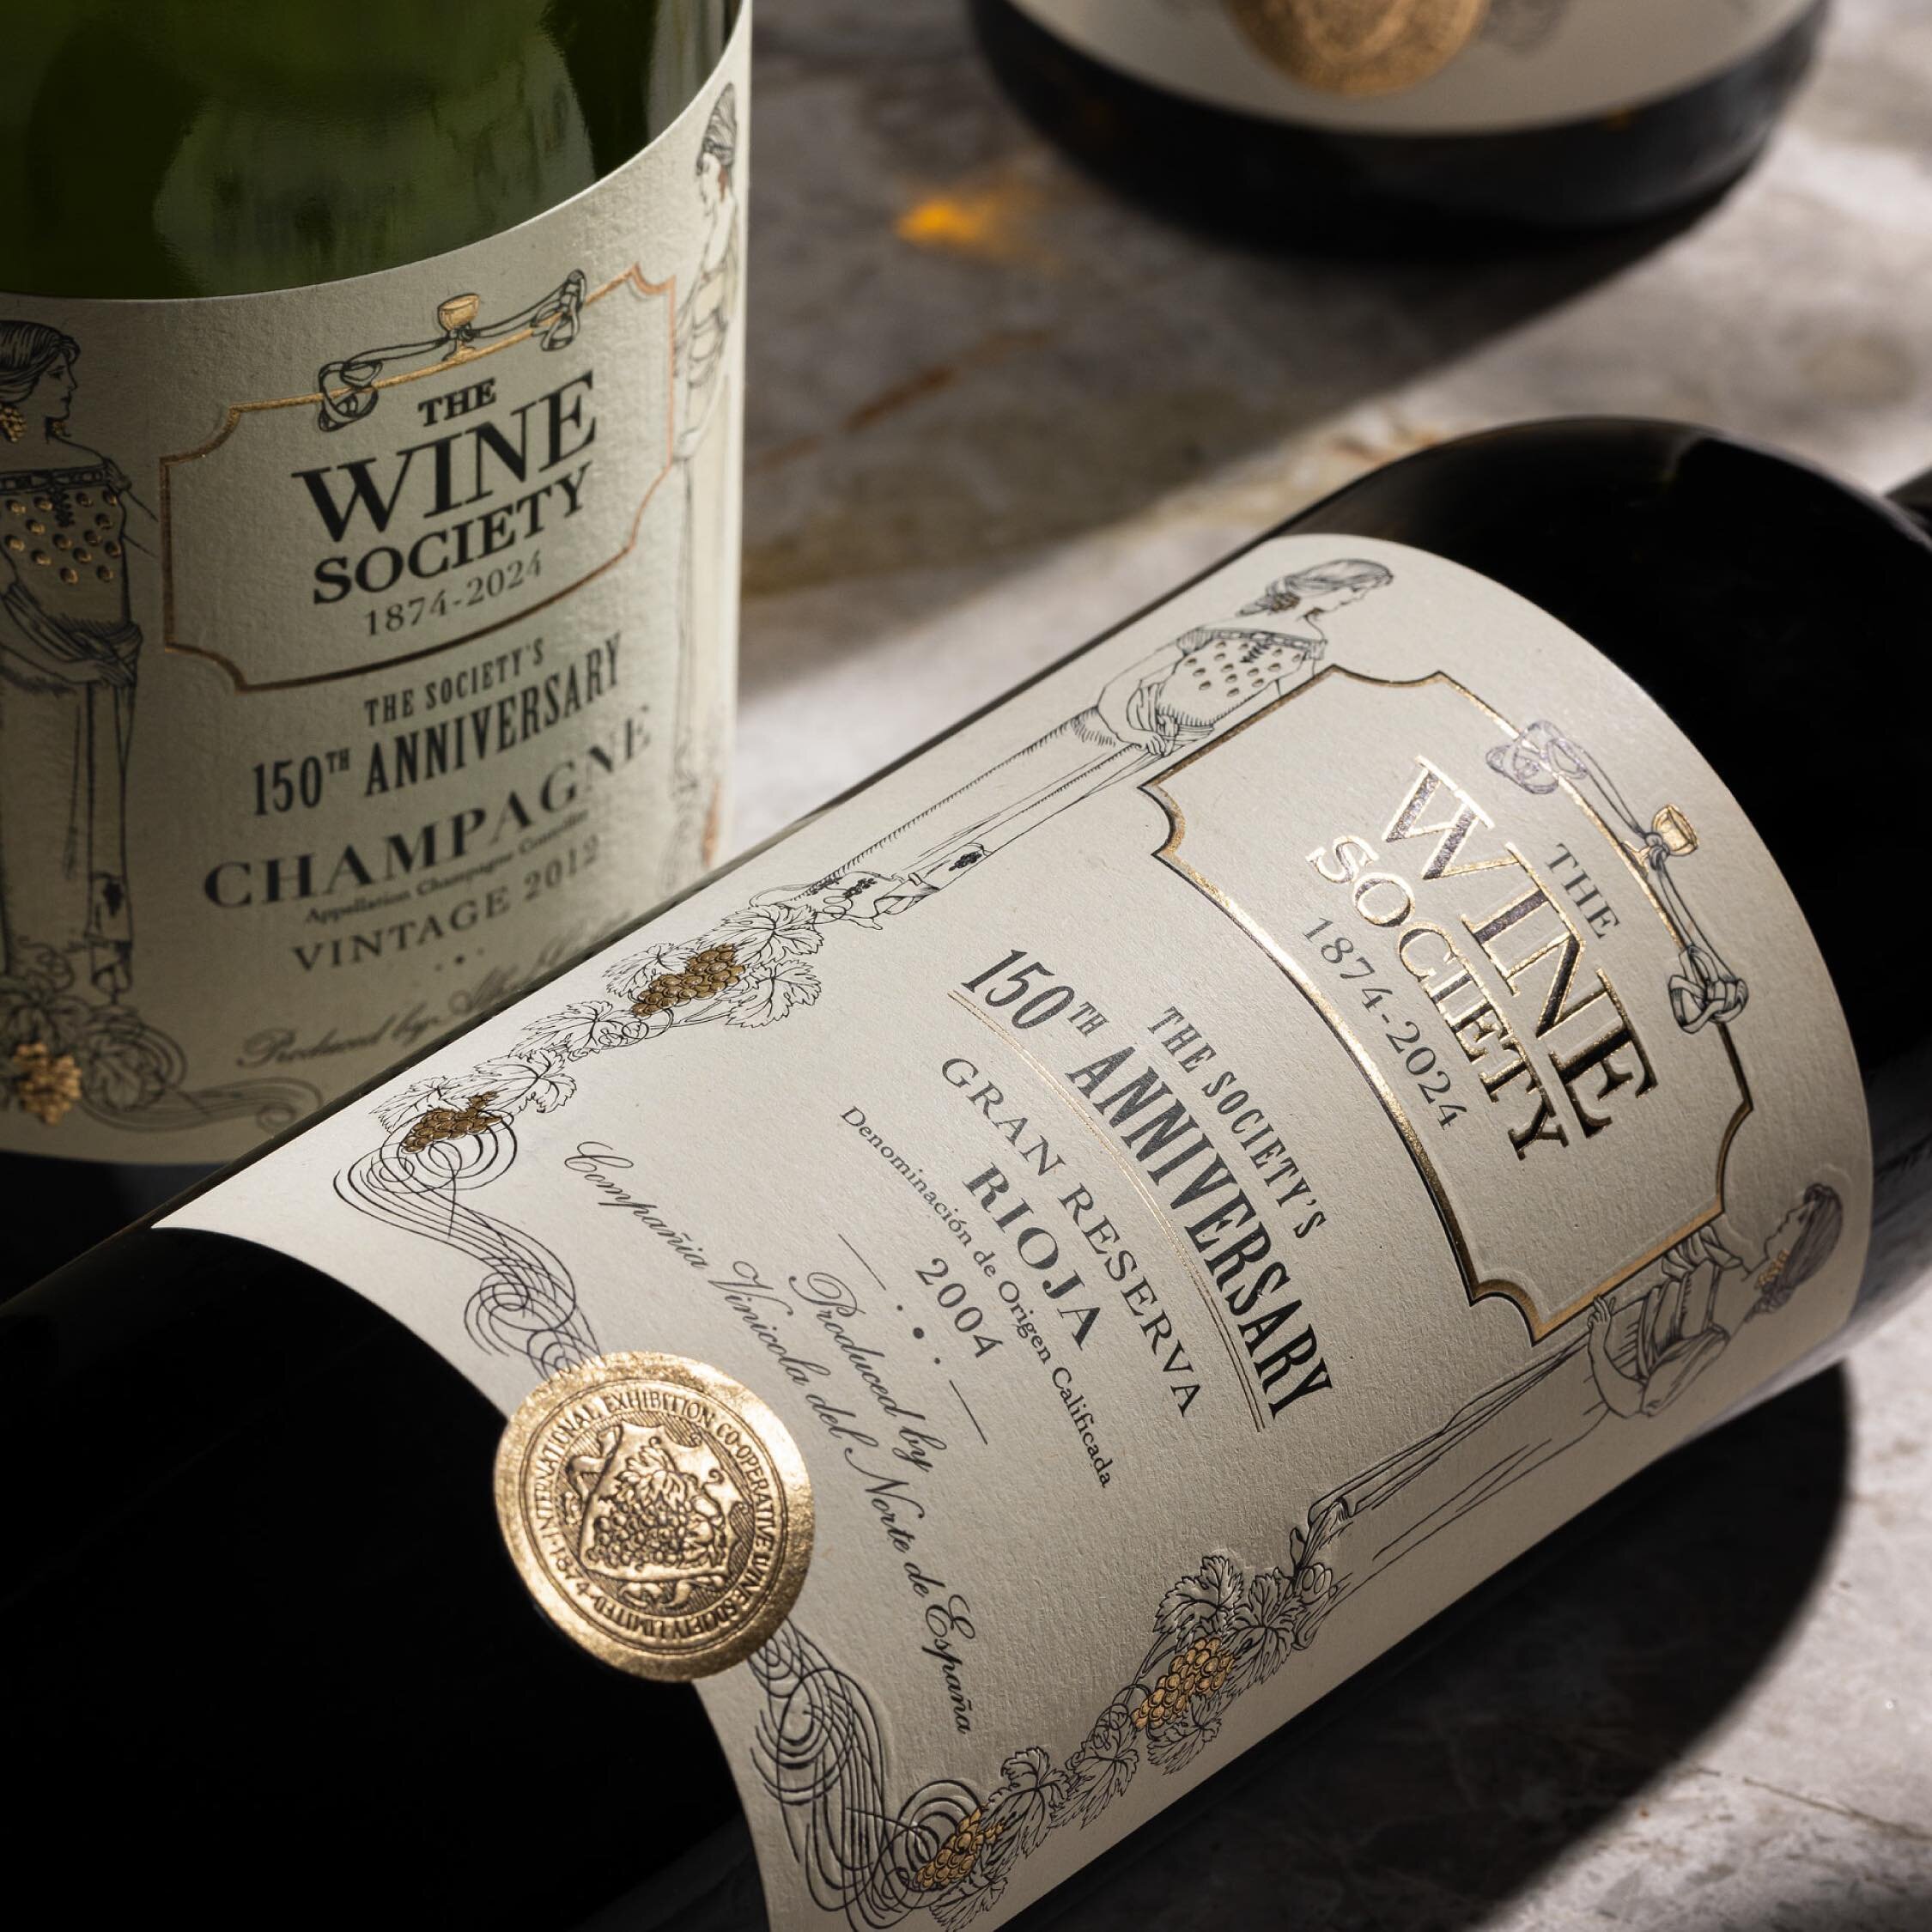 This year The Wine Society has released a &ldquo;never to be repeated&rdquo; collection of limited-edition fine wines for its 150th anniversary. The range includes classic vintages from some of the most famous estates in their collection, including L